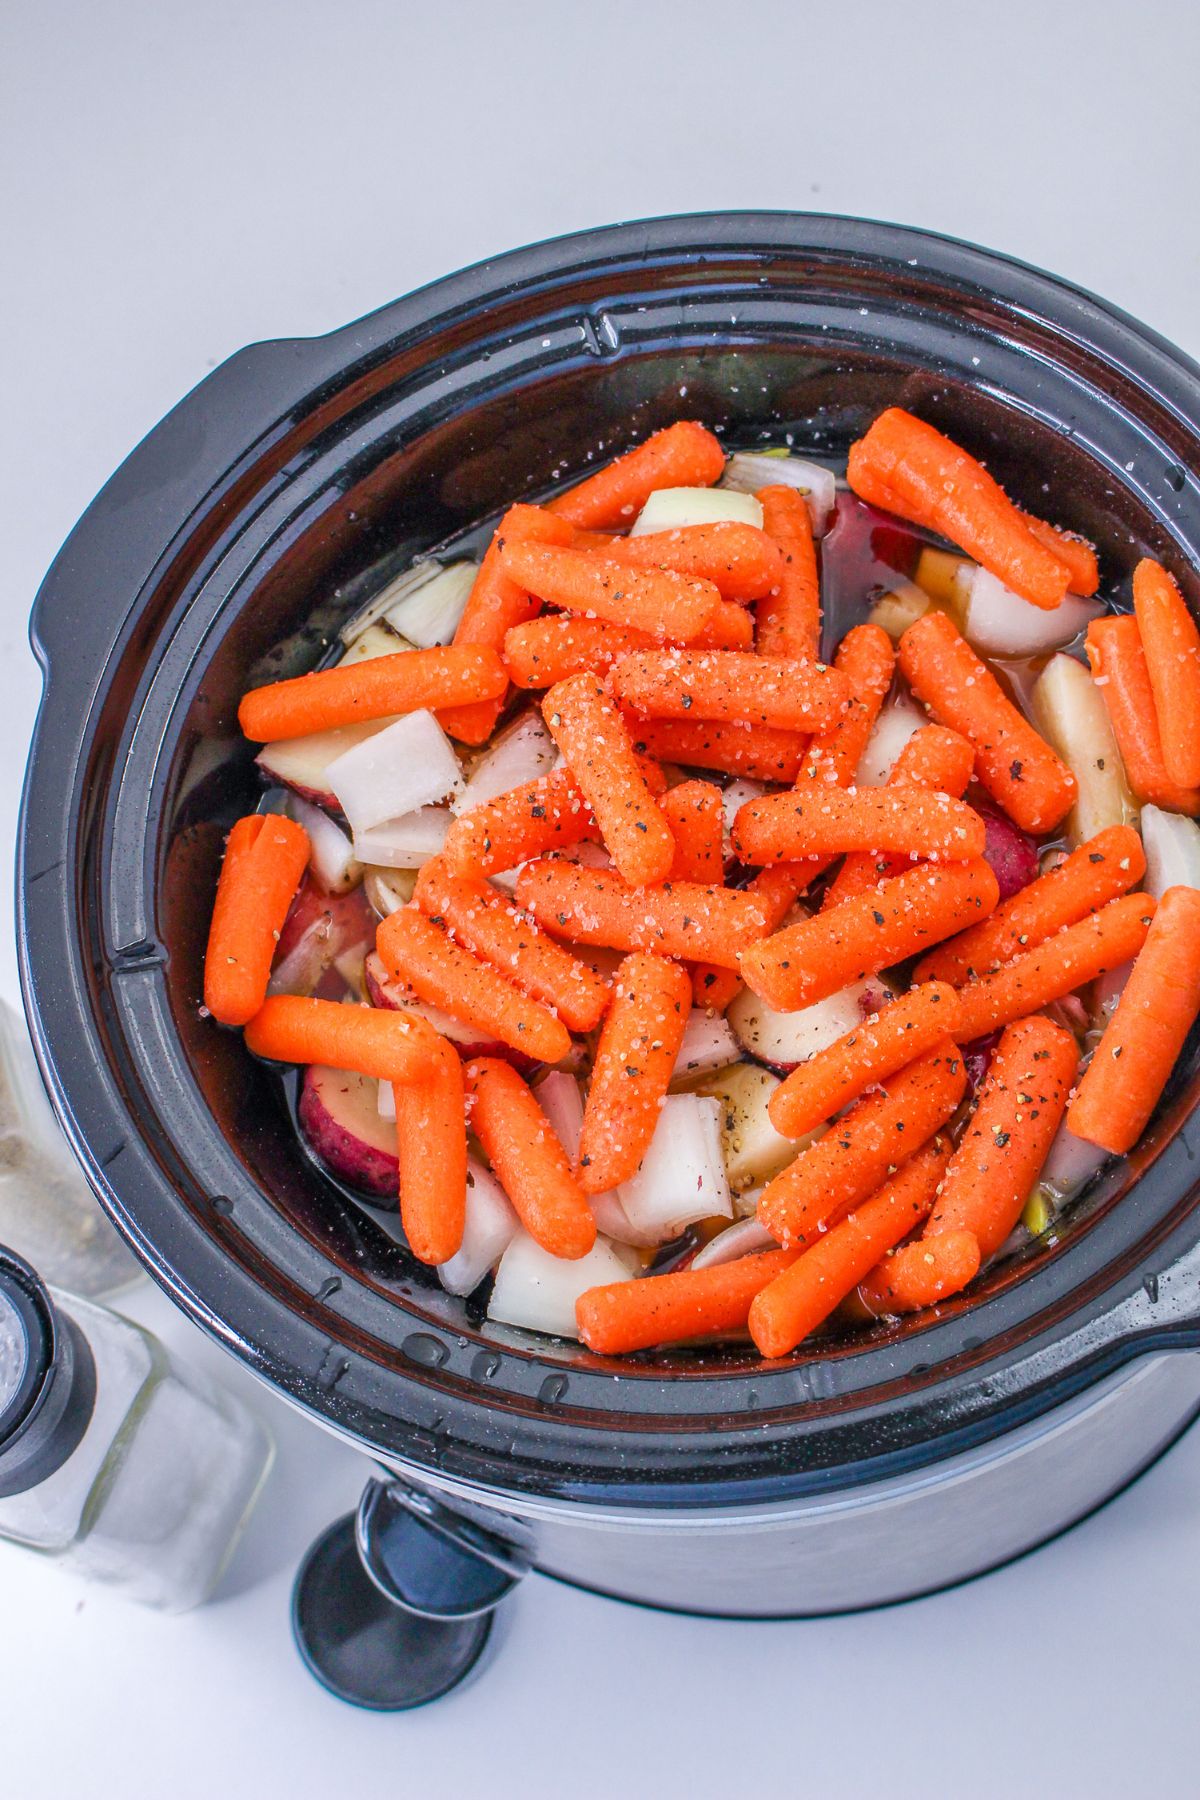 raw carrots, onions, potatoes, and beef roast in a slow cooker.